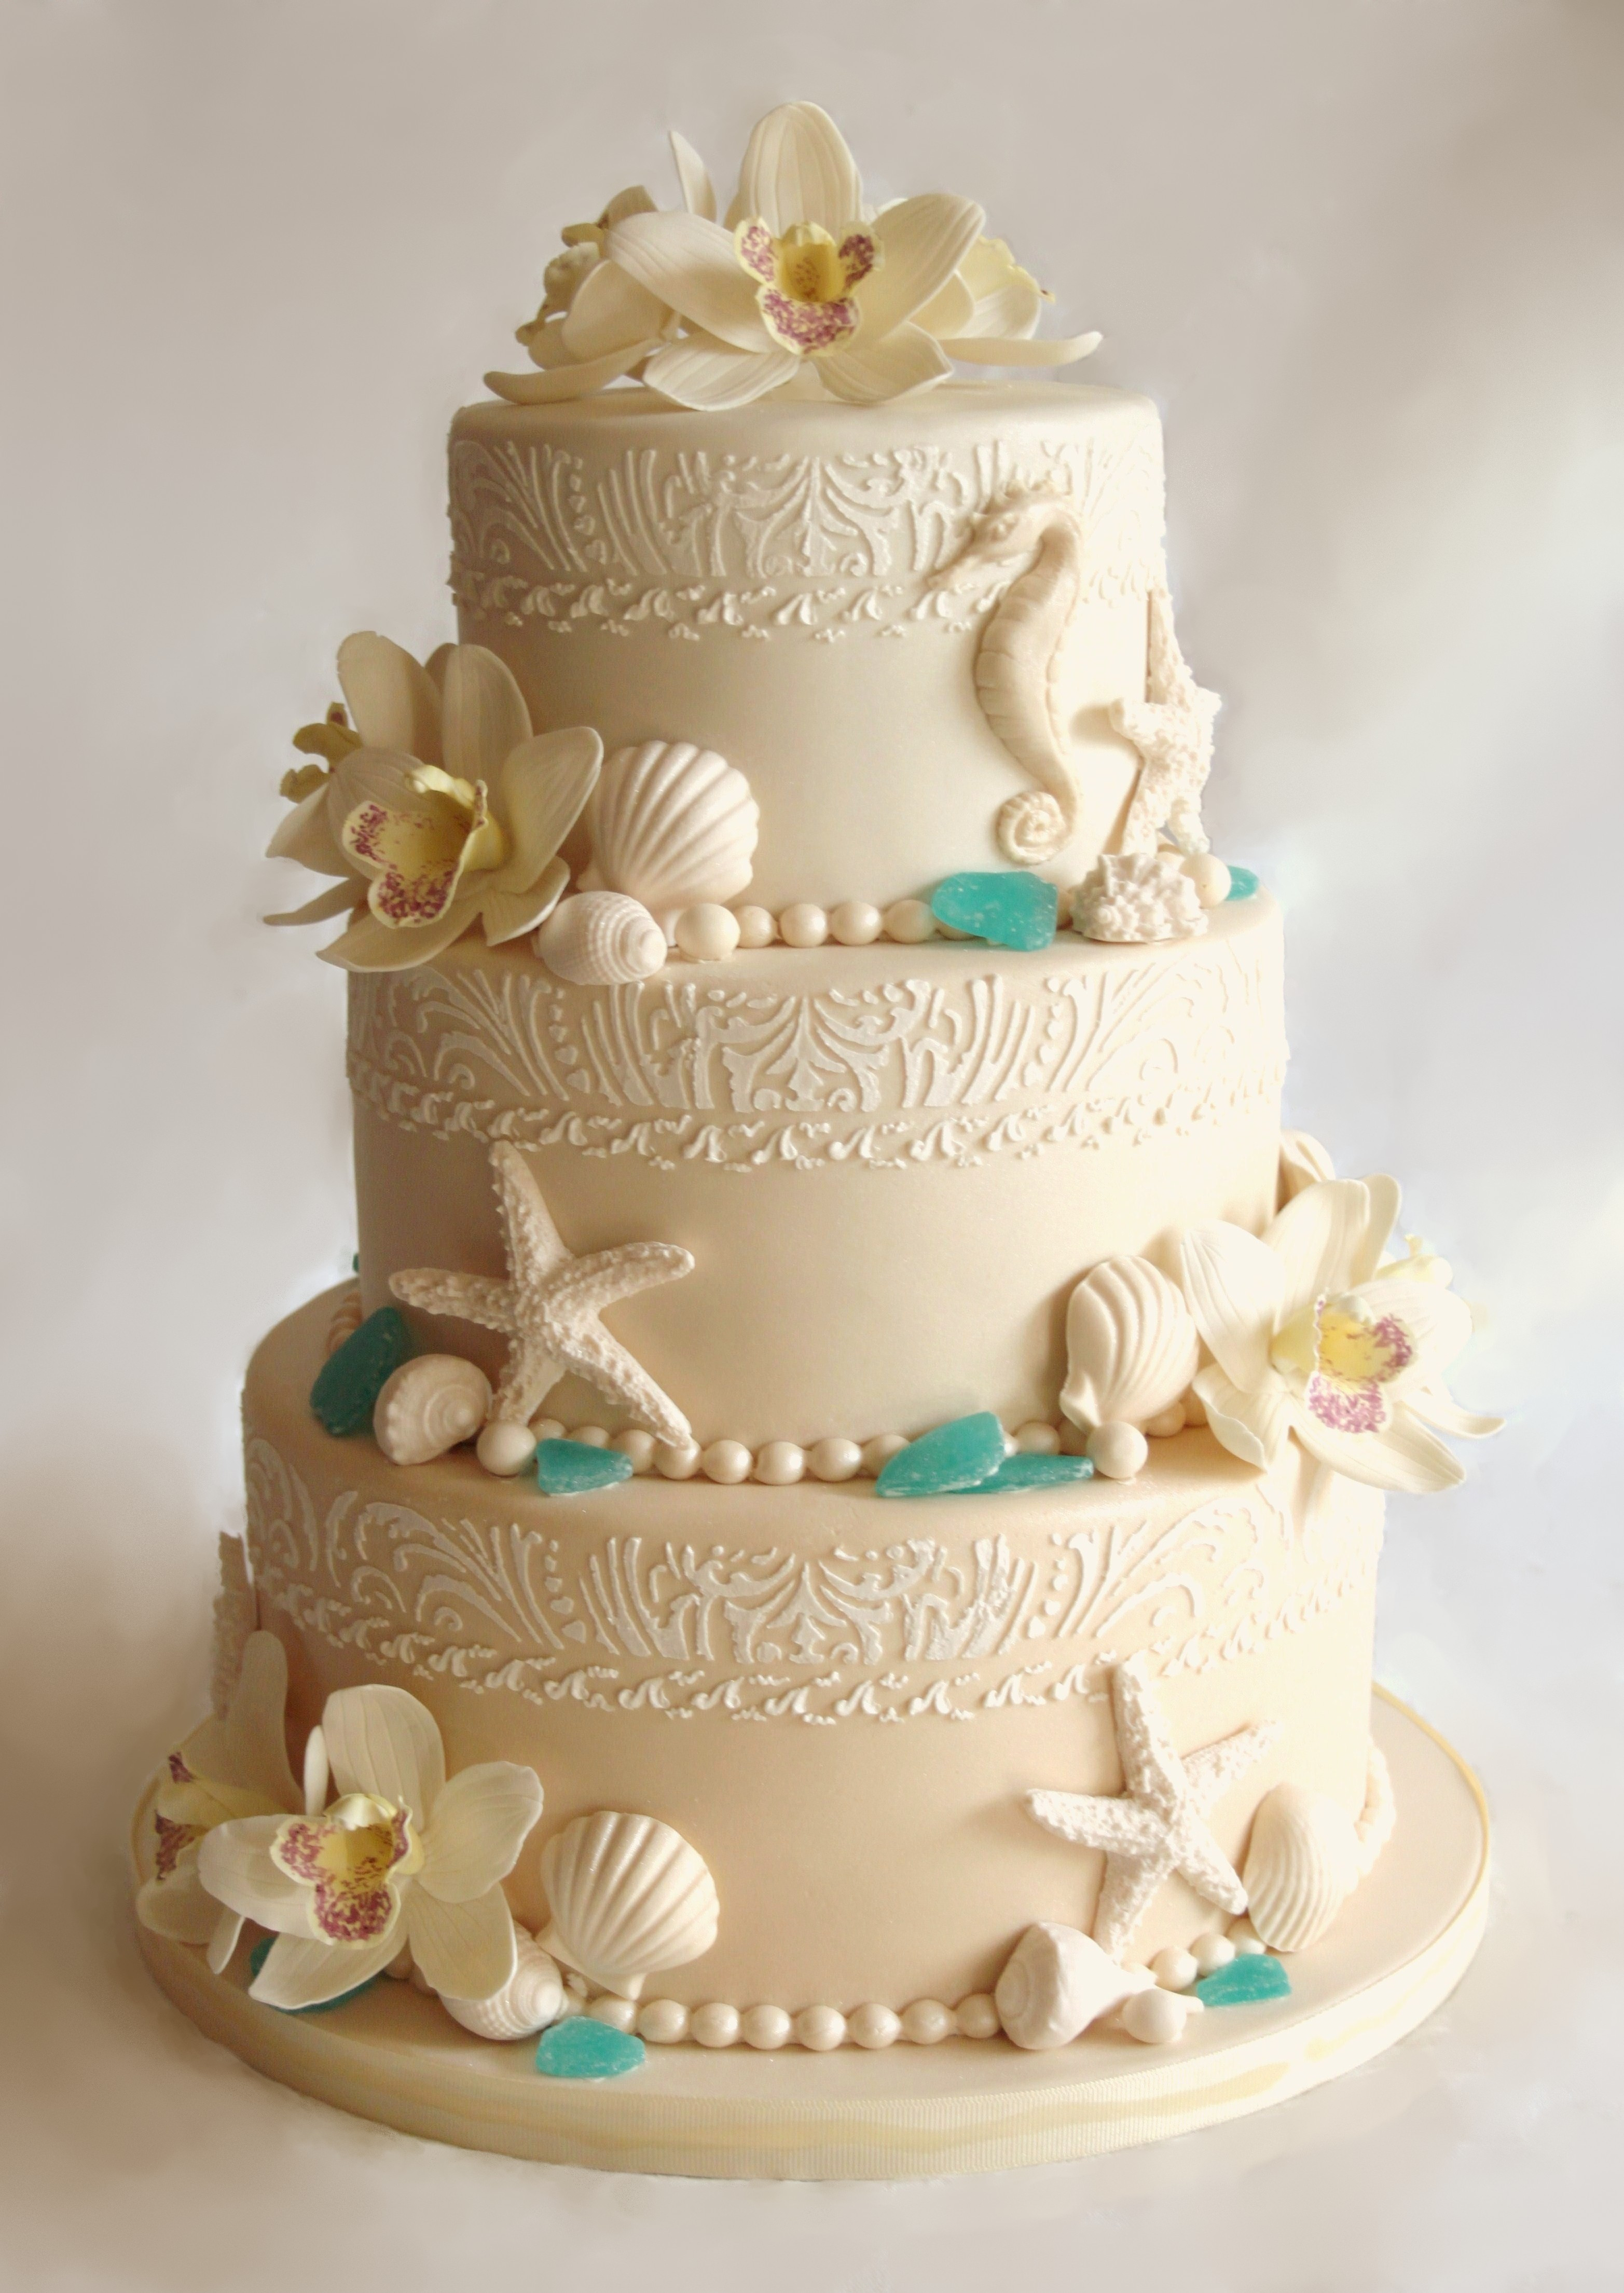 Beach Wedding Cakes
 30 ULTIMATE WEDDING CAKES TO STEAL THE SHOW